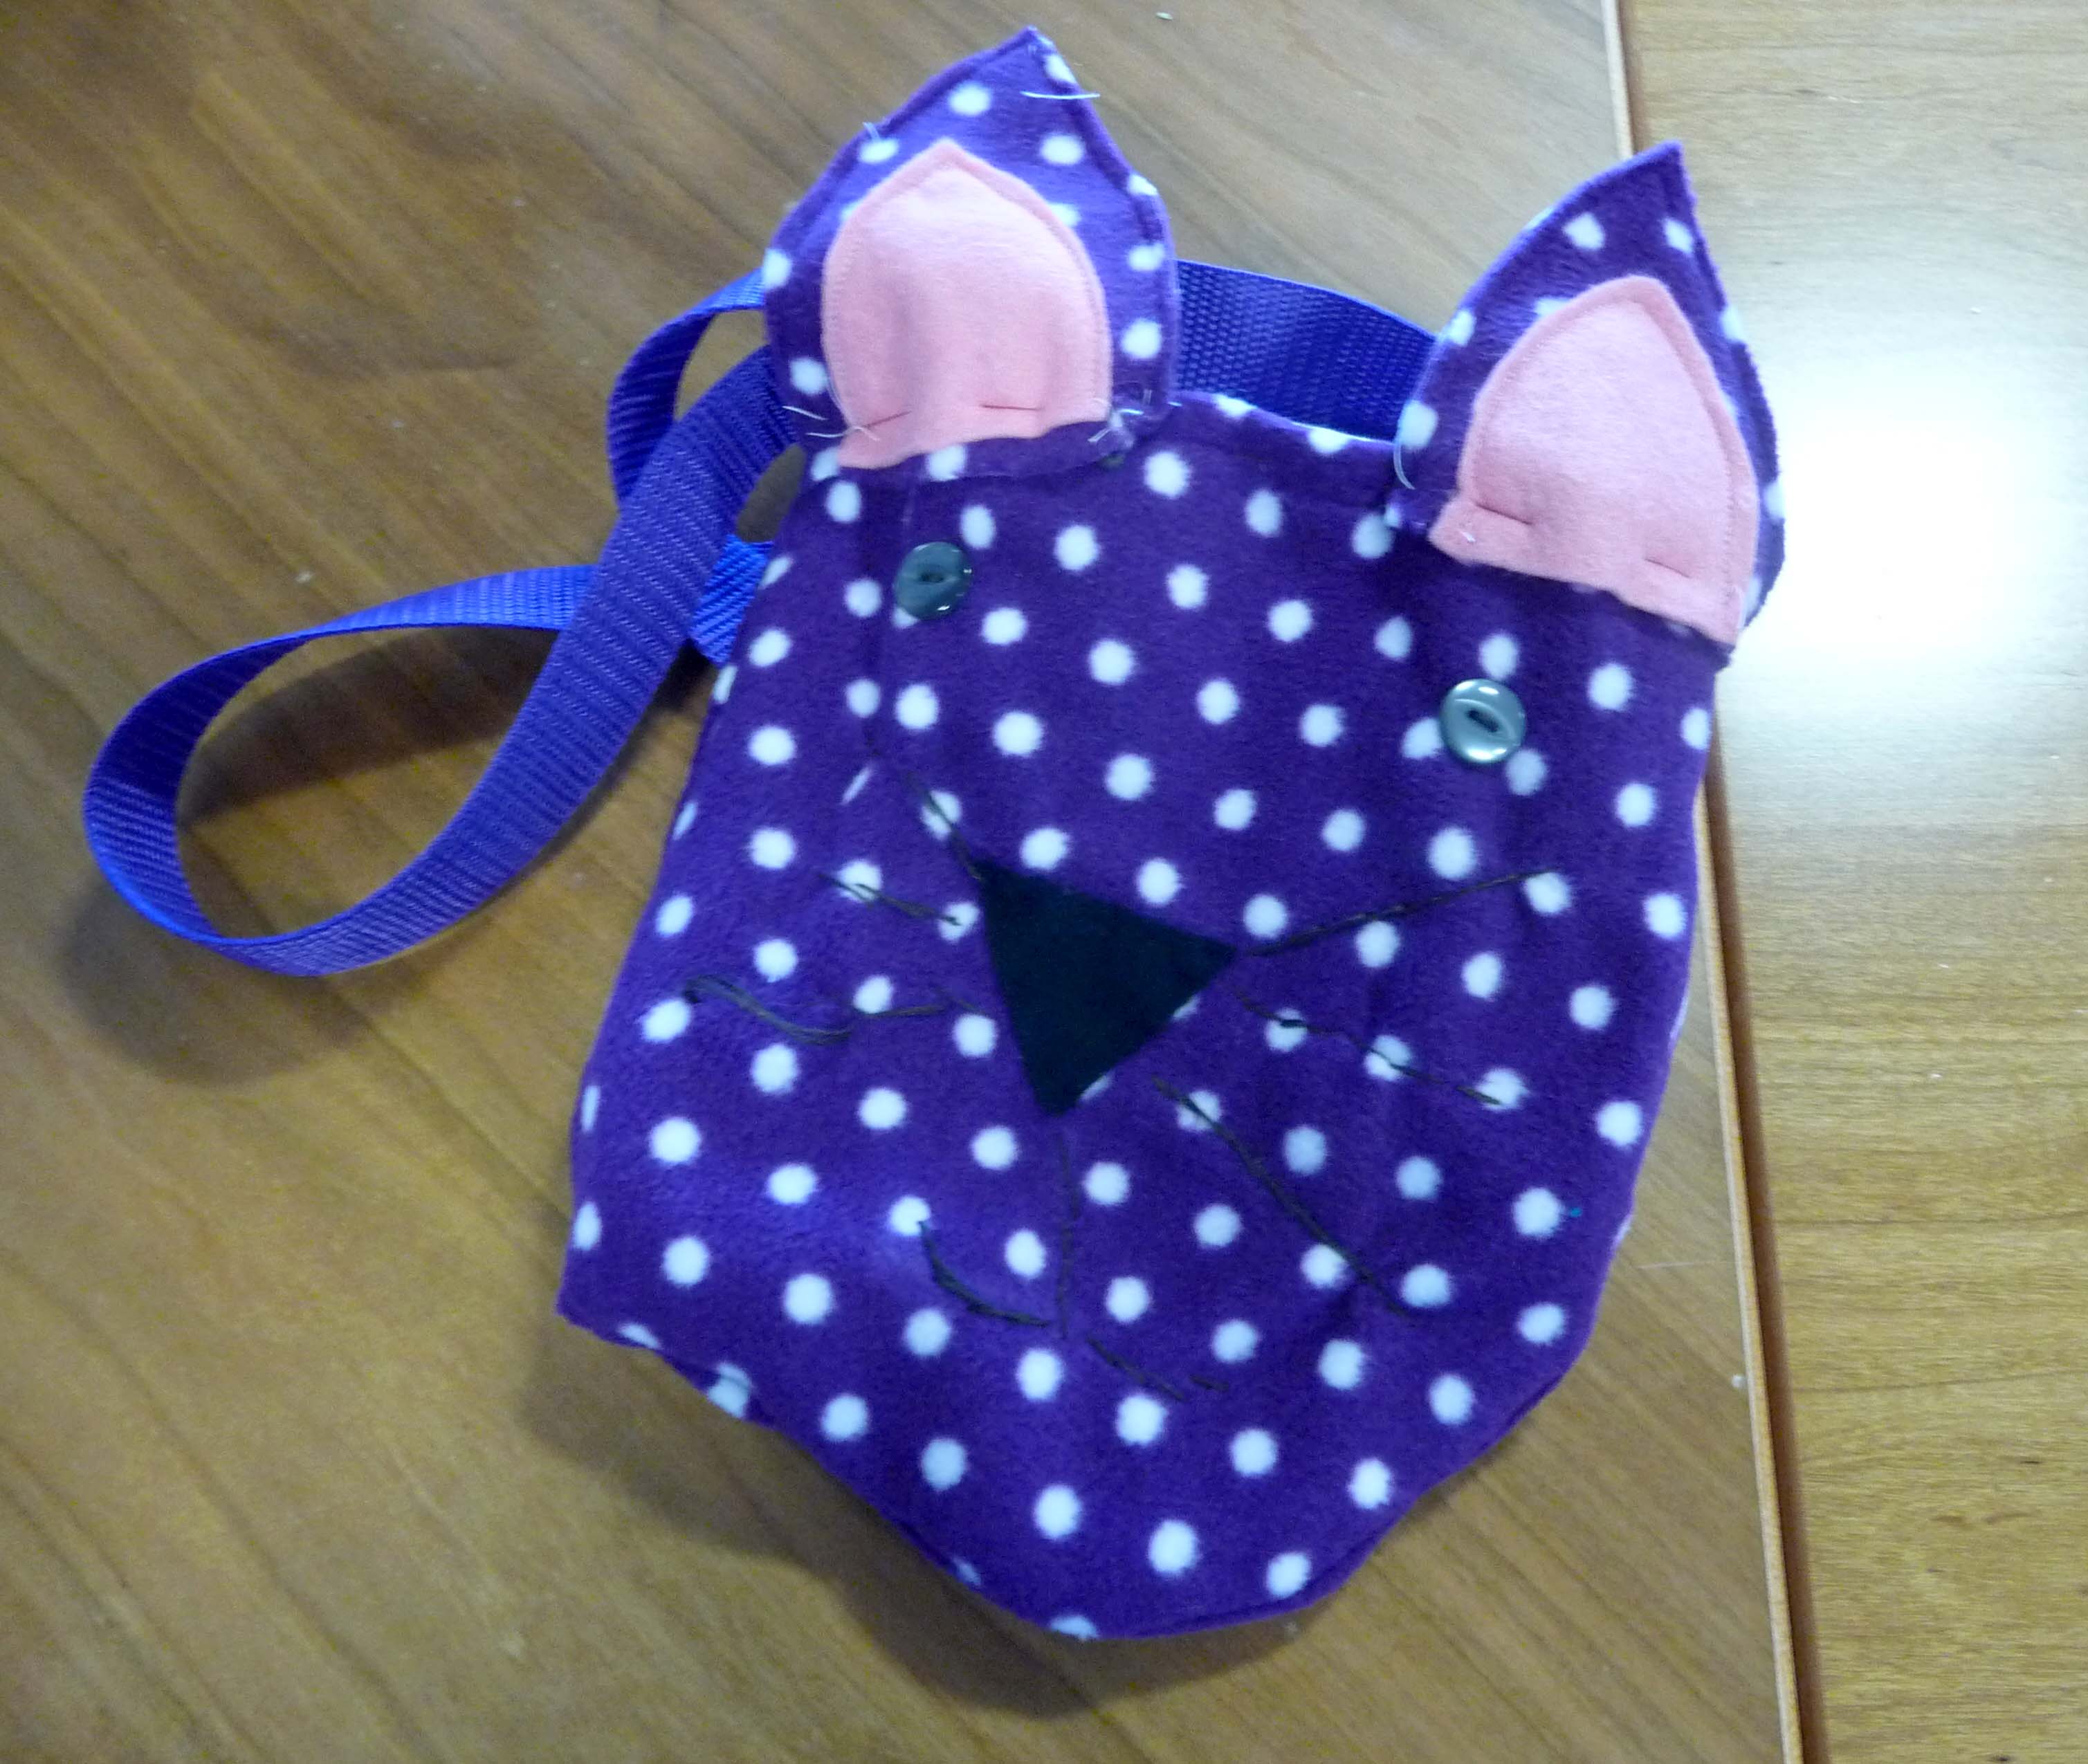 This is Ailis's bag tacked and ready for its final machine sewing